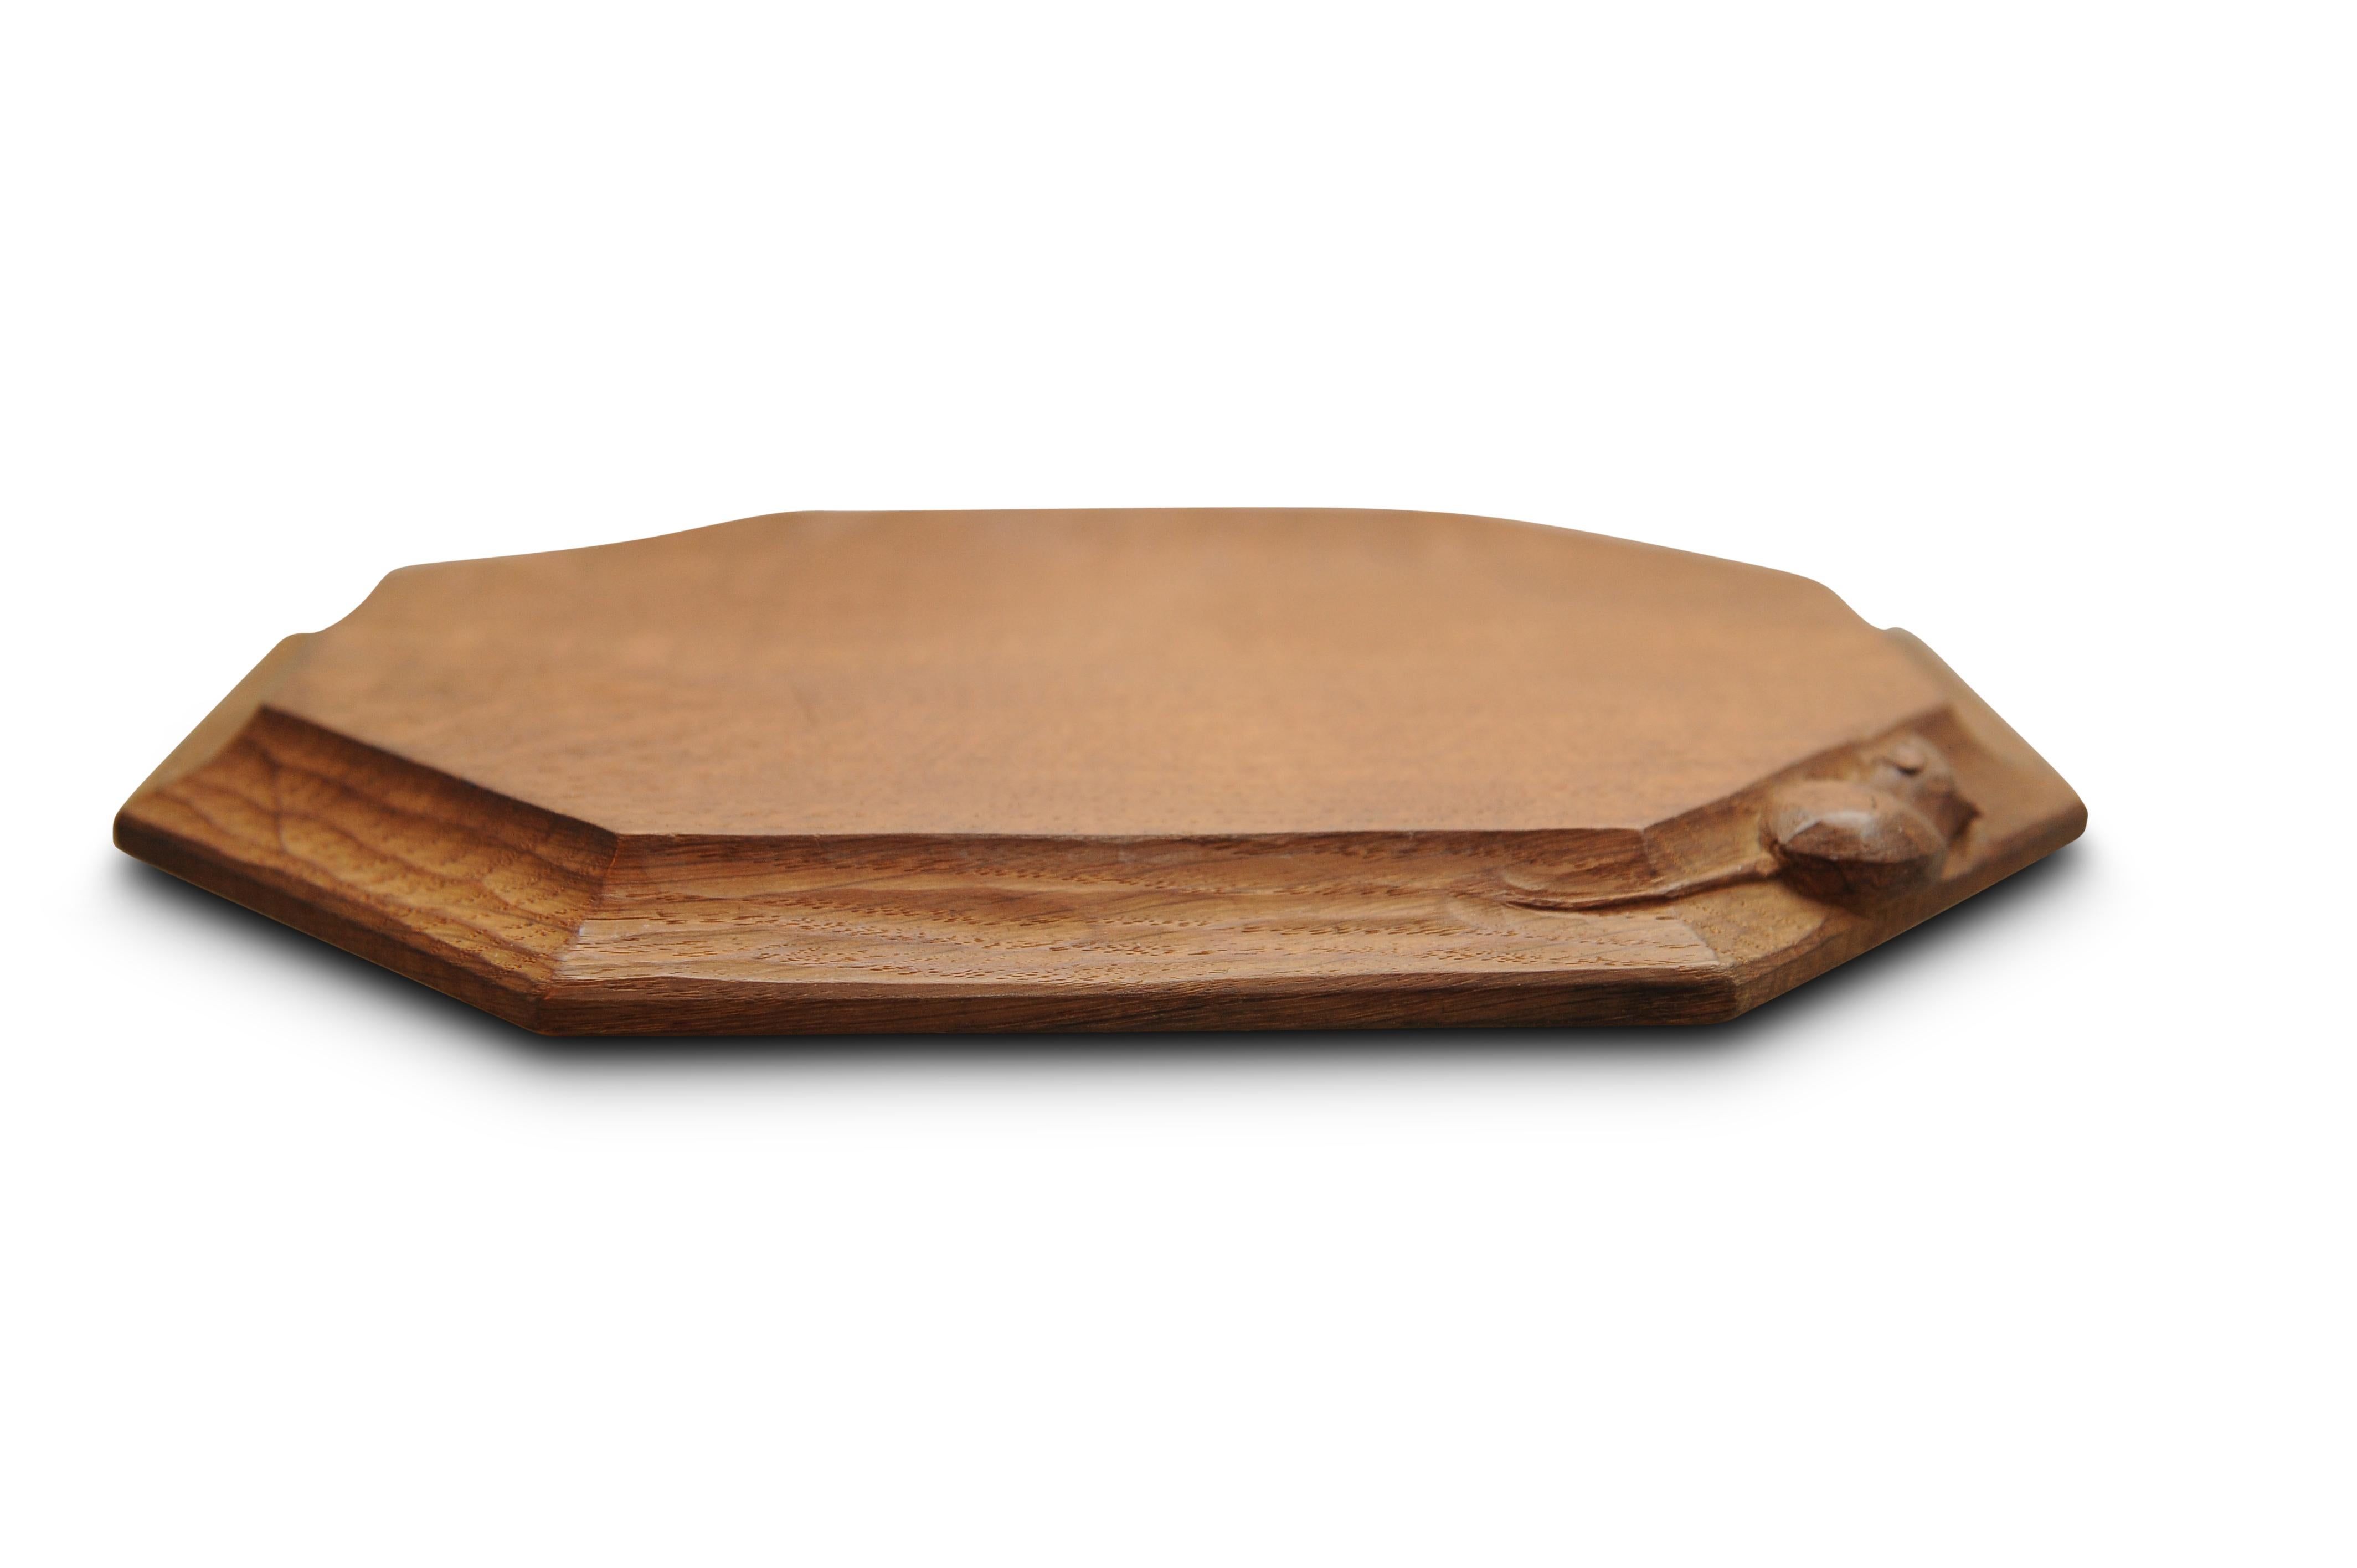 Robert (Mouseman) Thompson hand carved oak octagonal bread board with mouse motif by the English Arts & Crafts movement craftsman

Collectors item

About: Robert (Mouseman) Thompson (7 May 1876 – 8 December 1955) was a British furniture maker.